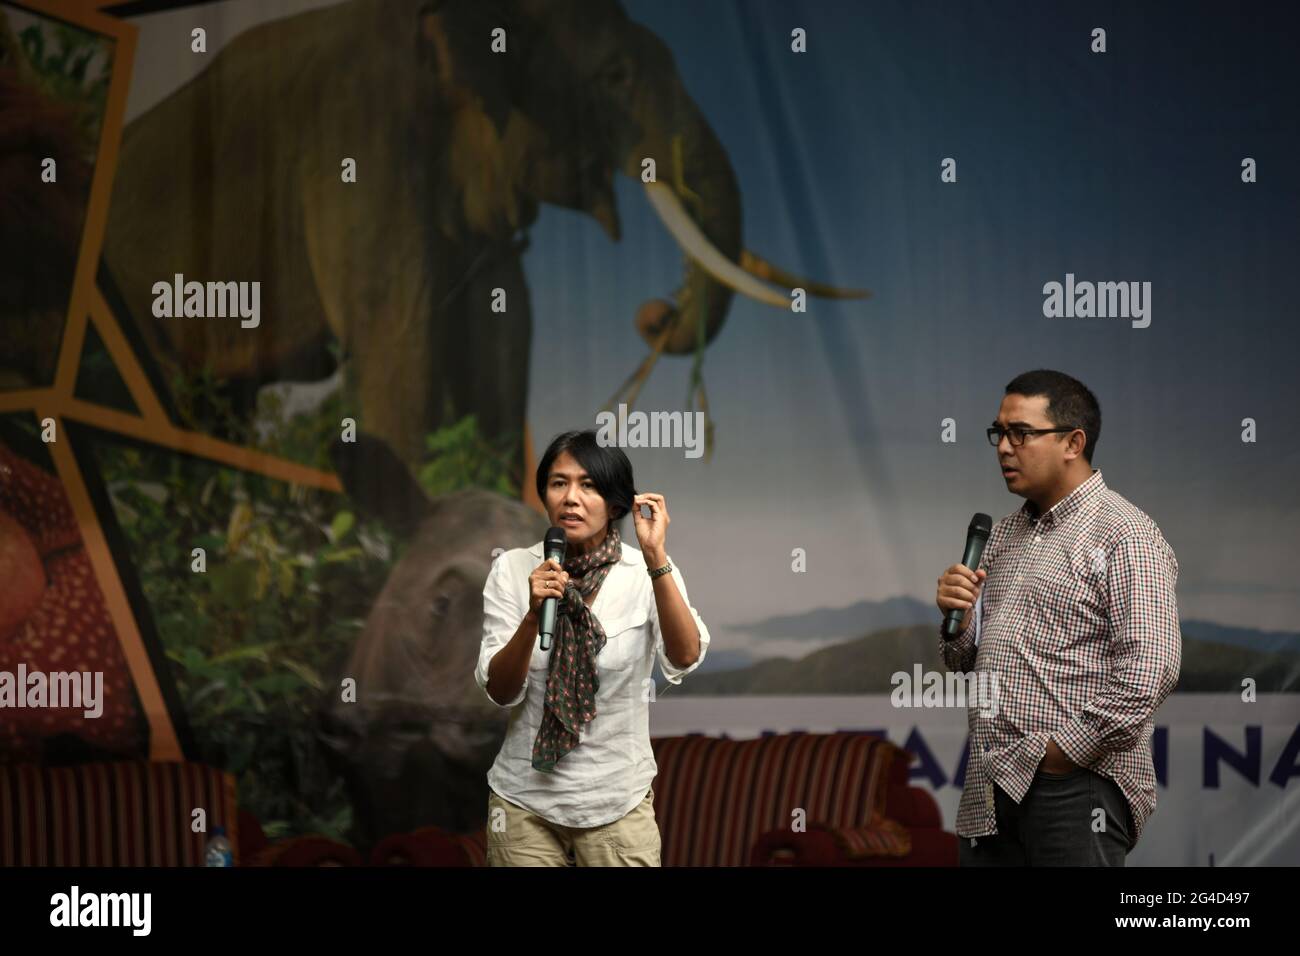 Indonesian broadcast news presenter Desi Anwar and Muhammad Farhan having a talk show on national park and nature conservation on stage, during an event held by Indonesia's Ministry of Forestry in Way Kambas National Park, Lampung, Indonesia. Stock Photo